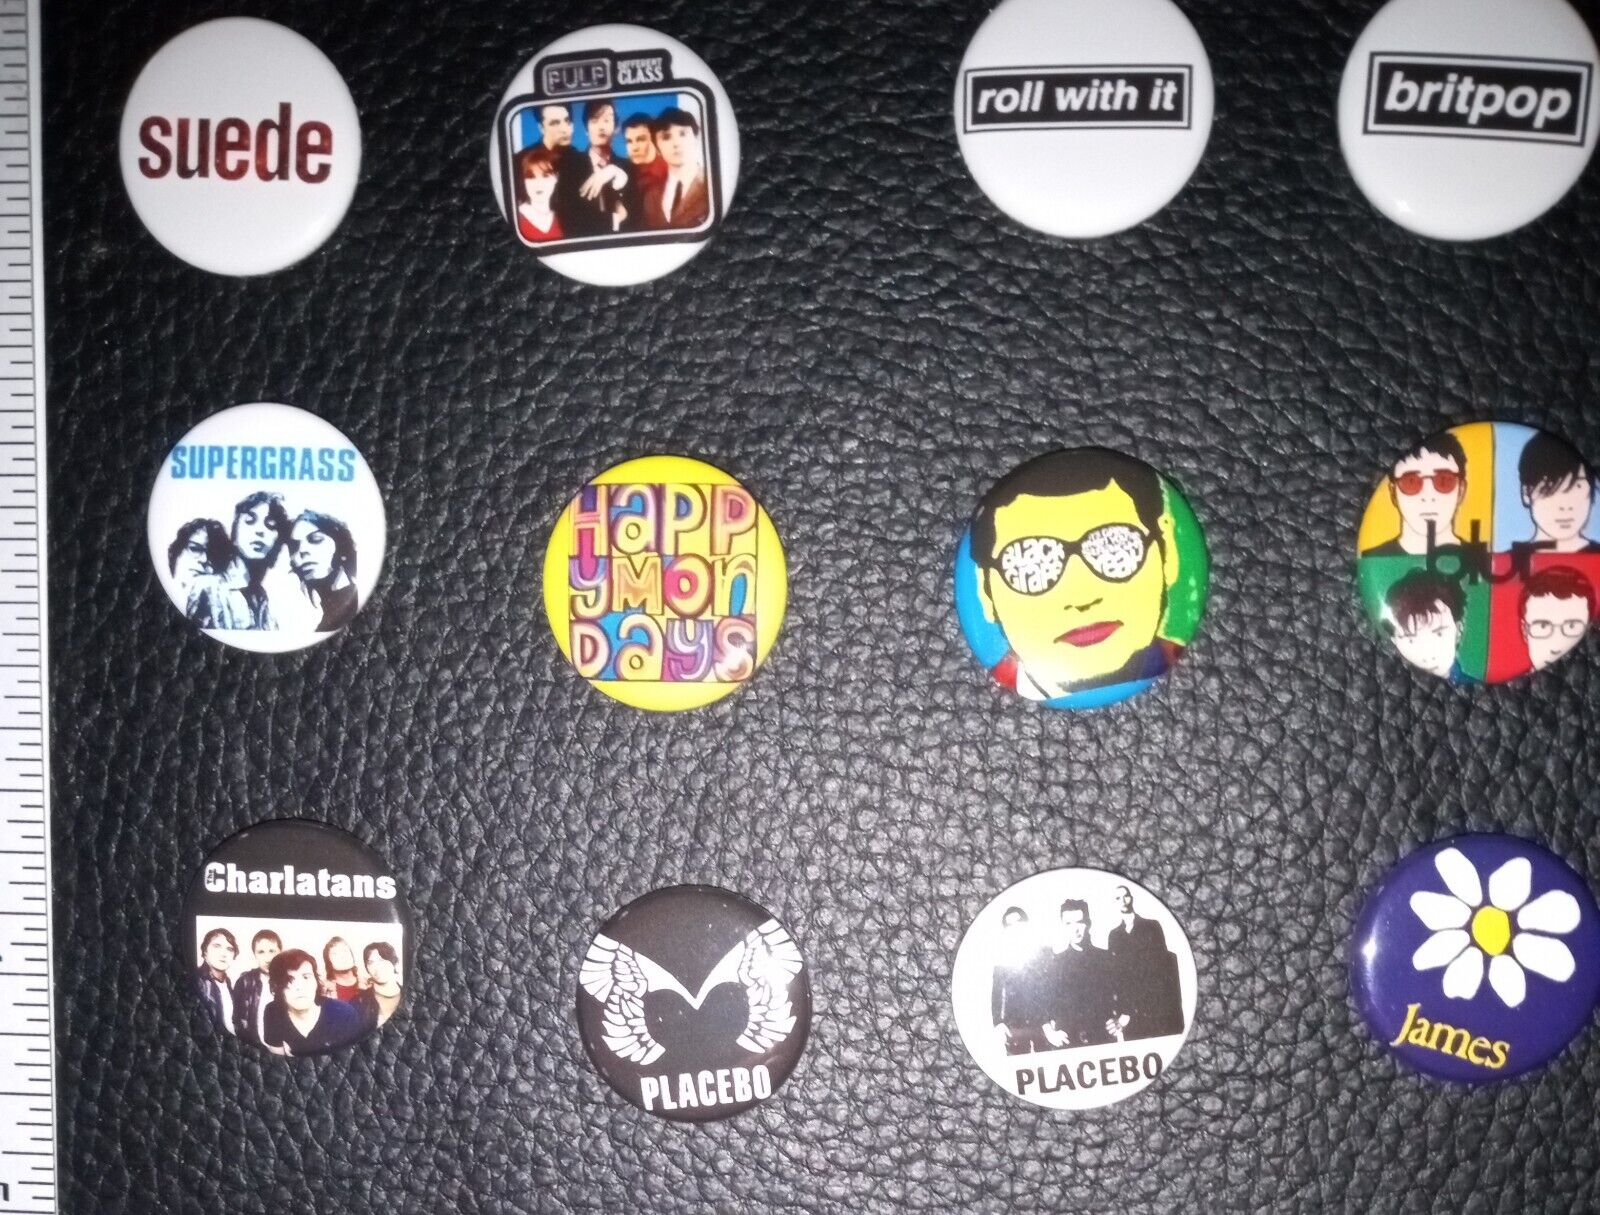 12 Britpop Band Button Pins Badges Madchester Oasis Pulp Suede Placebo